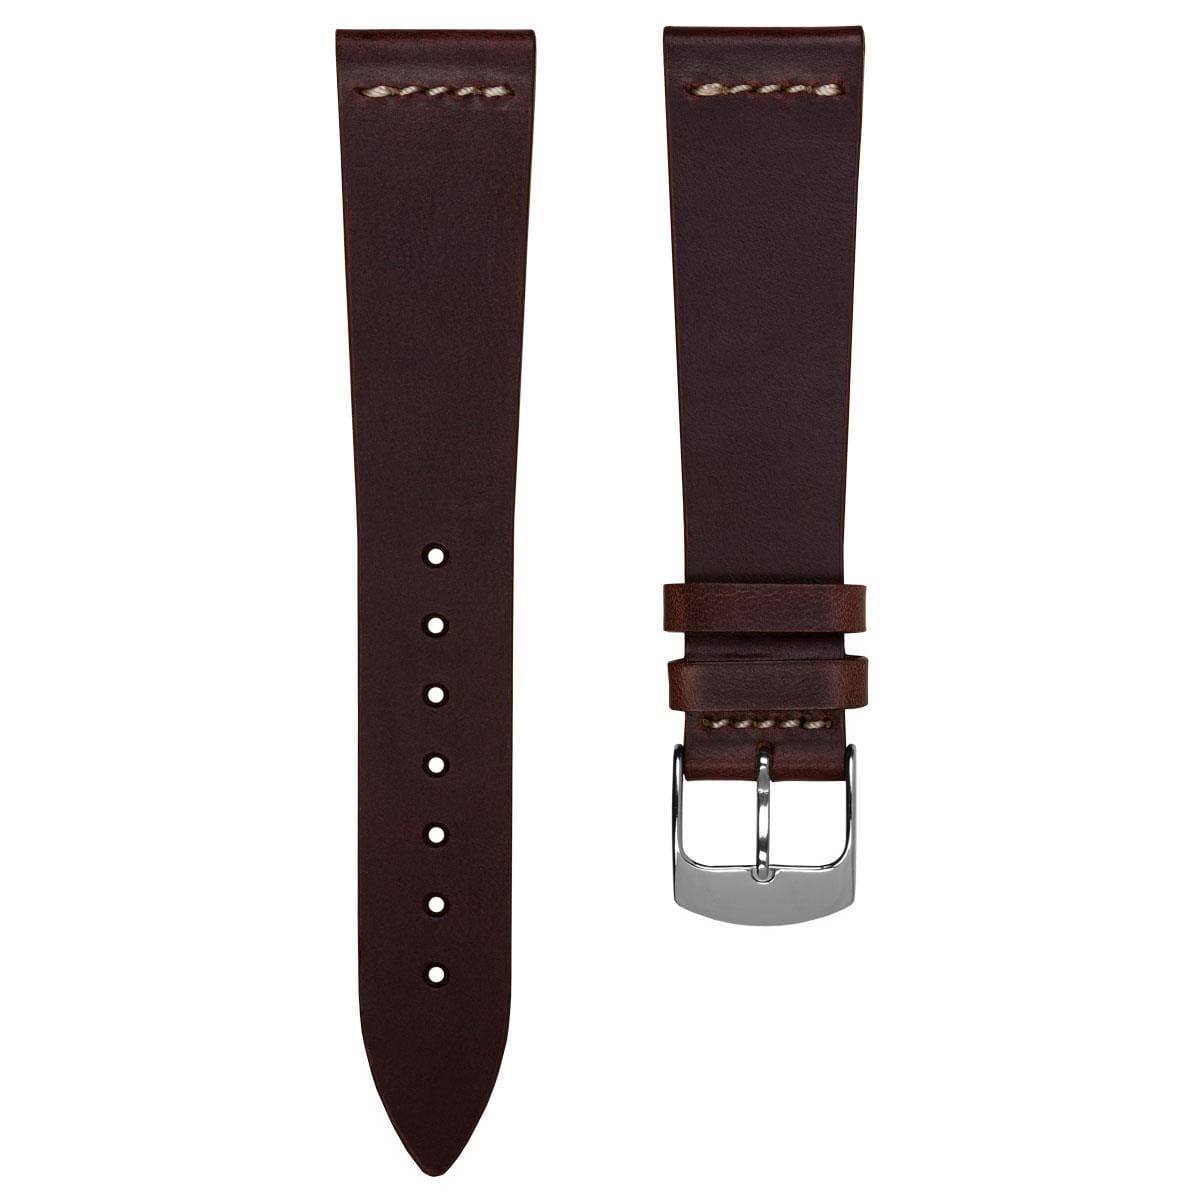 Clanville Vintage Horween Chromexcel Leather Dress Watch Strap - Conke